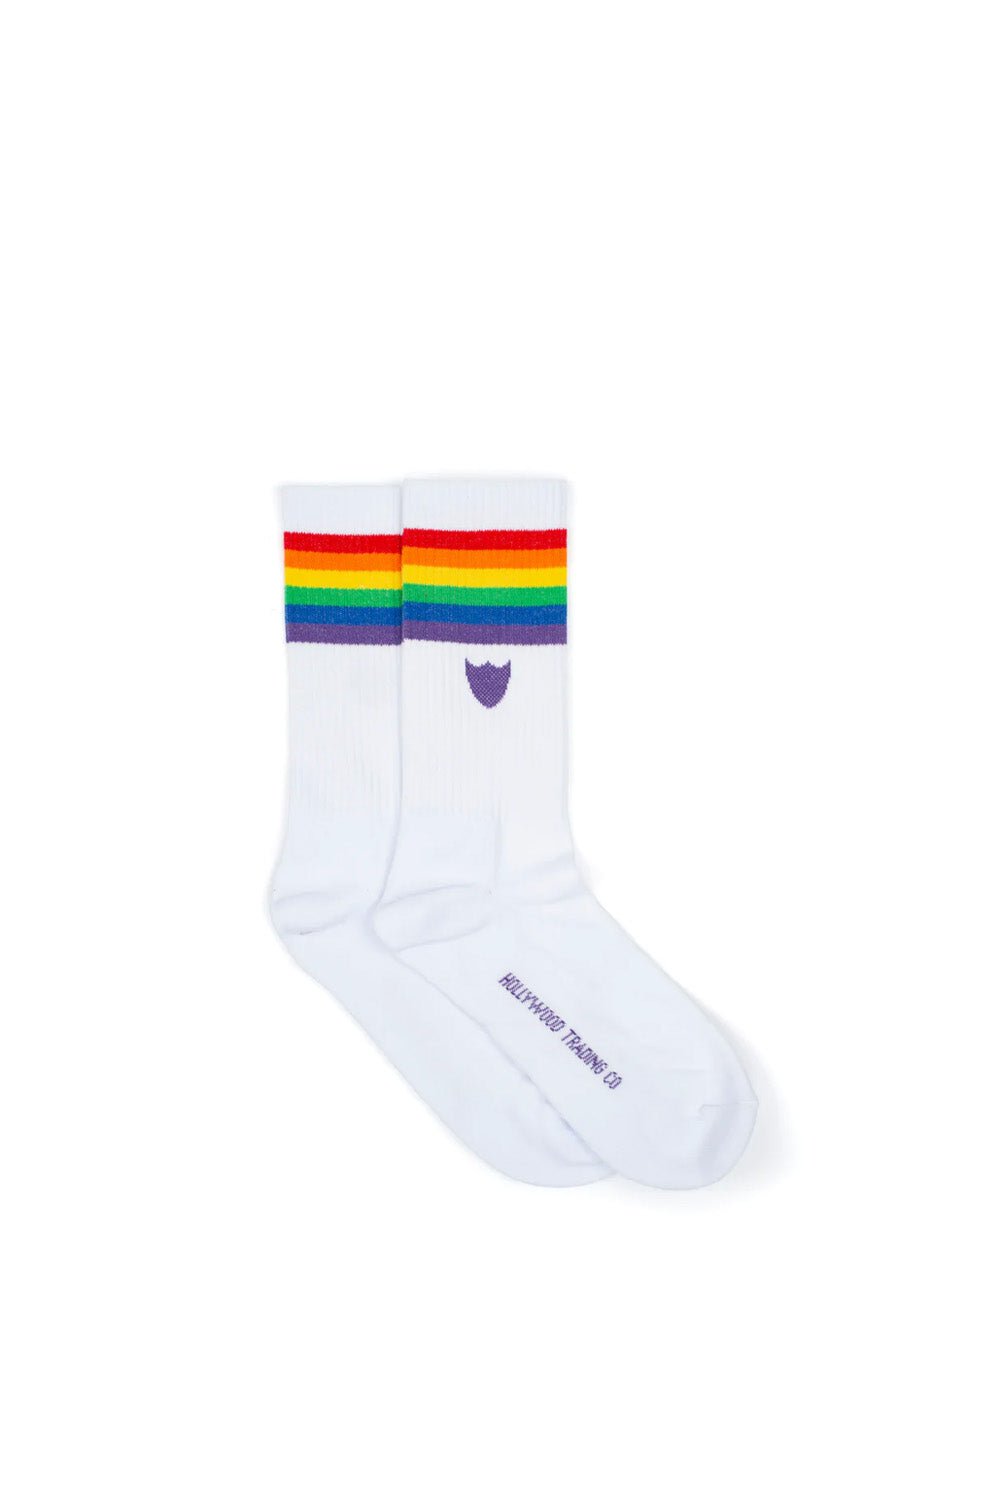 SHIELD RAINBOW WOMAN SOCKS Signature woman socks with Hollywood Trading Co script logo. 85% Cotton 10% Polyamide 5% Elastane. Made in Italy HTC LOS ANGELES